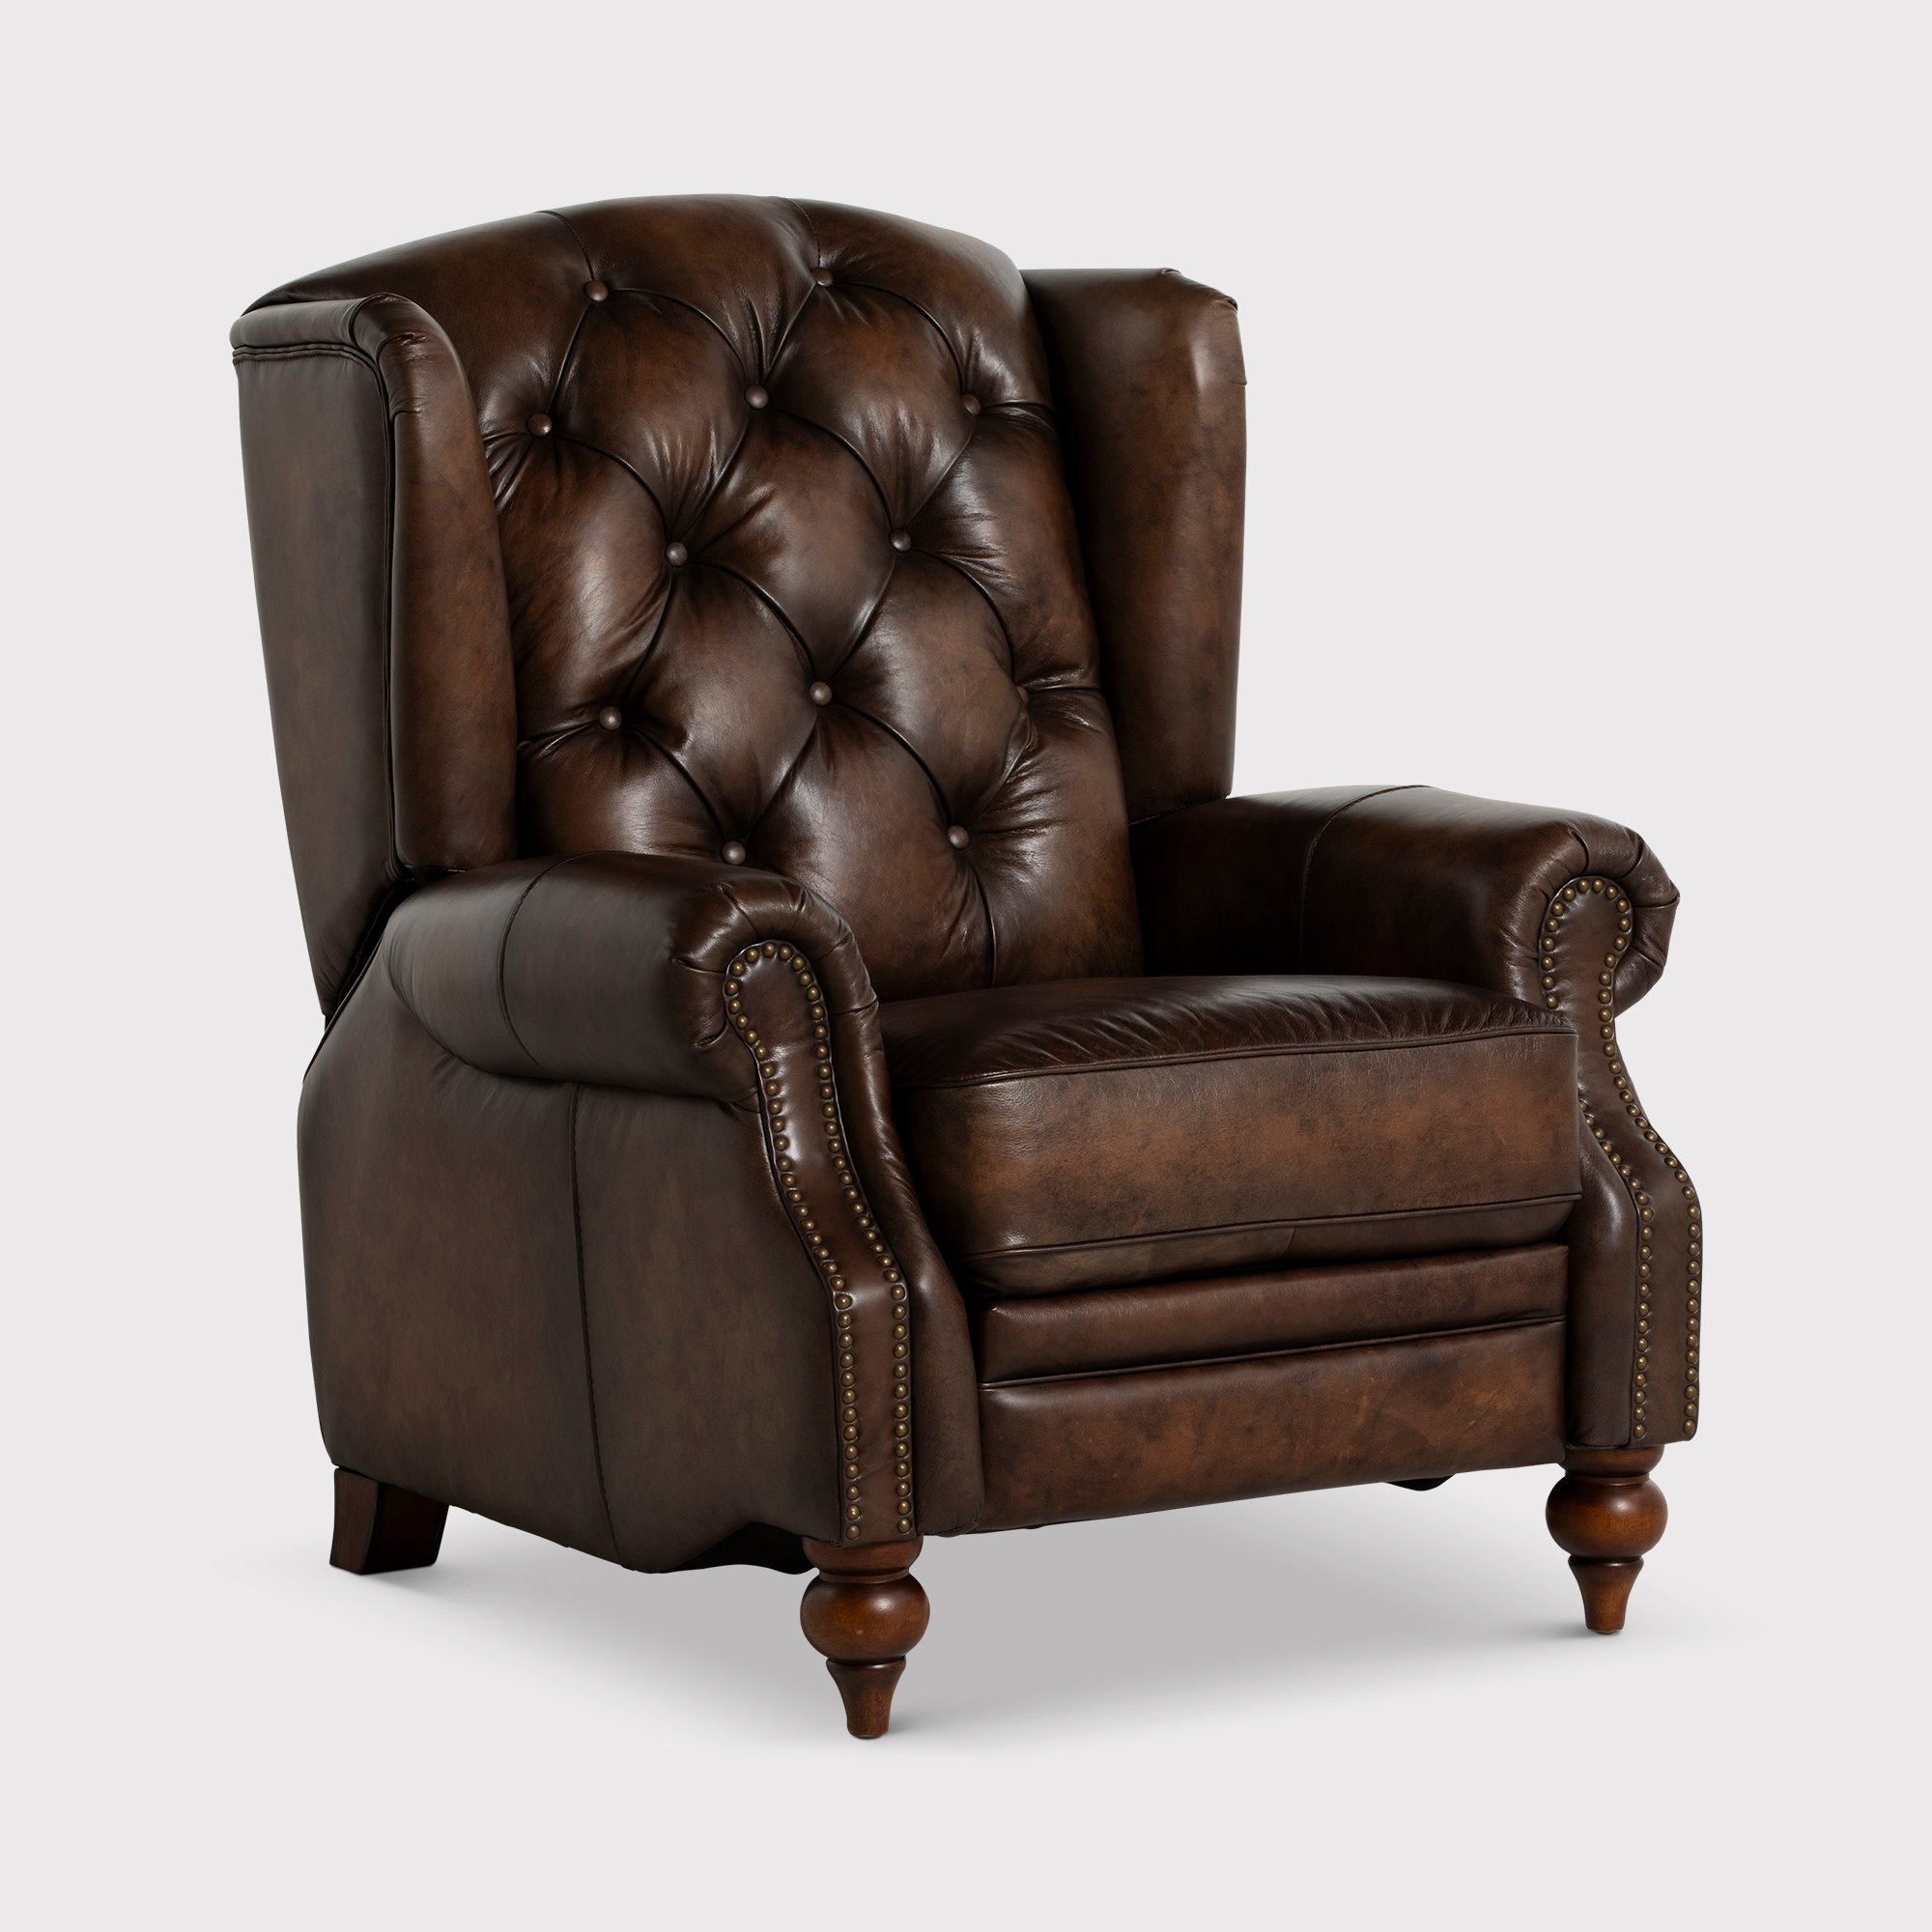 Ullswater Power Recliner Wing Recliner Chair, Brown Fabric | Barker & Stonehouse